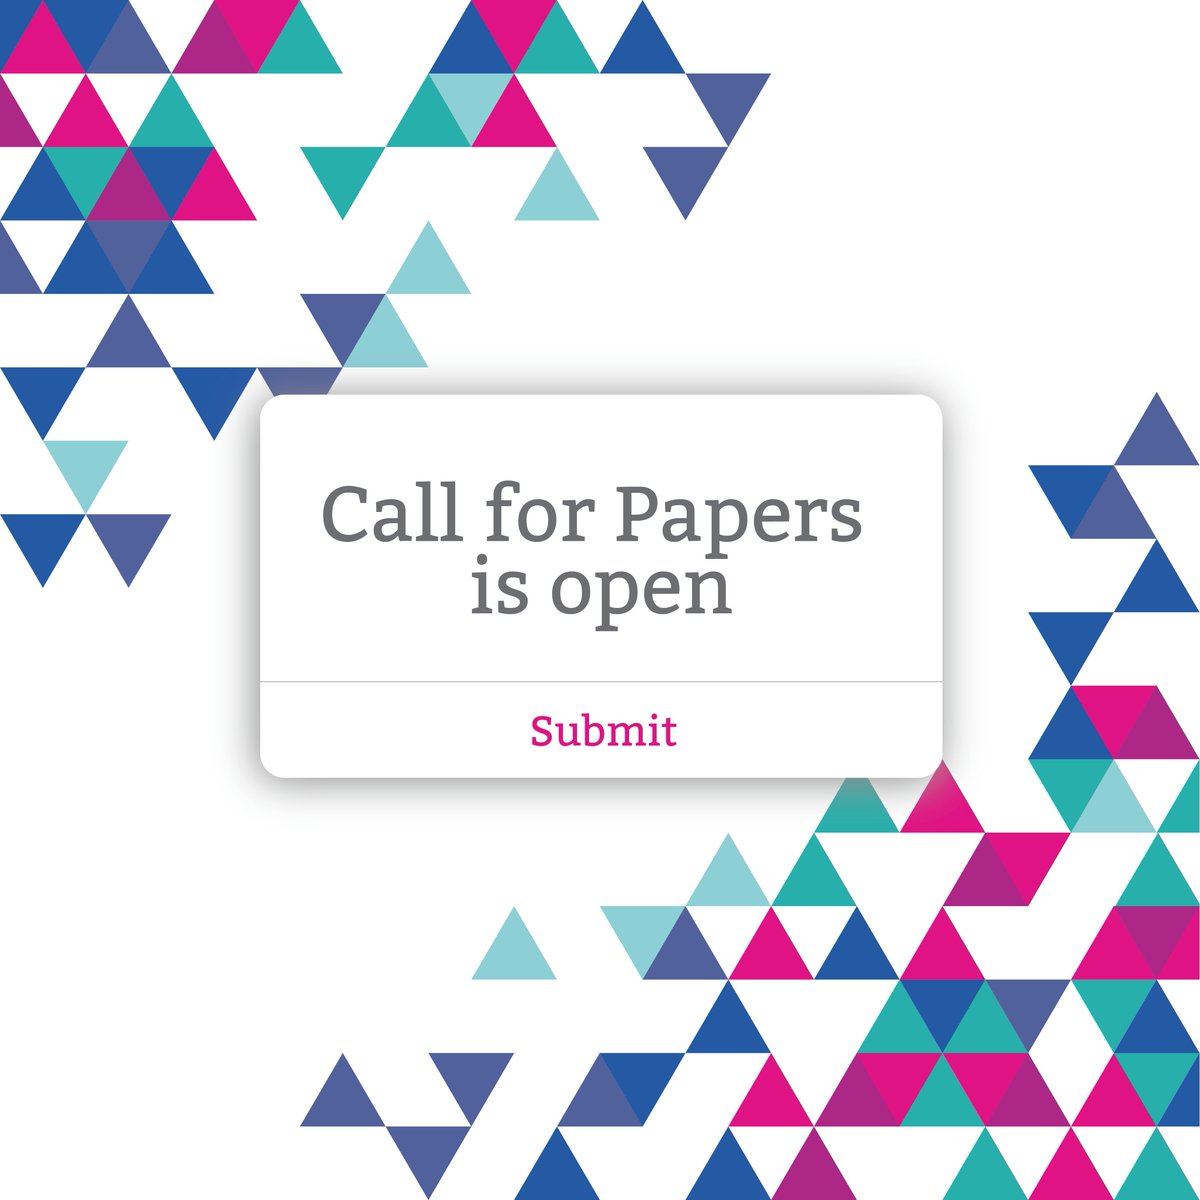 🥁 The moment you've been waiting for is here! 🥁

The Call for Papers is now LIVE for #DrupalConBarcelona! 📣 Share your passion, expertise, and magic moments with the global Drupal community! 🌍✨

🔗 events.drupal.org/barcelona2024

#Drupal #DrupalConEur #DrupalCon #CallForPapers